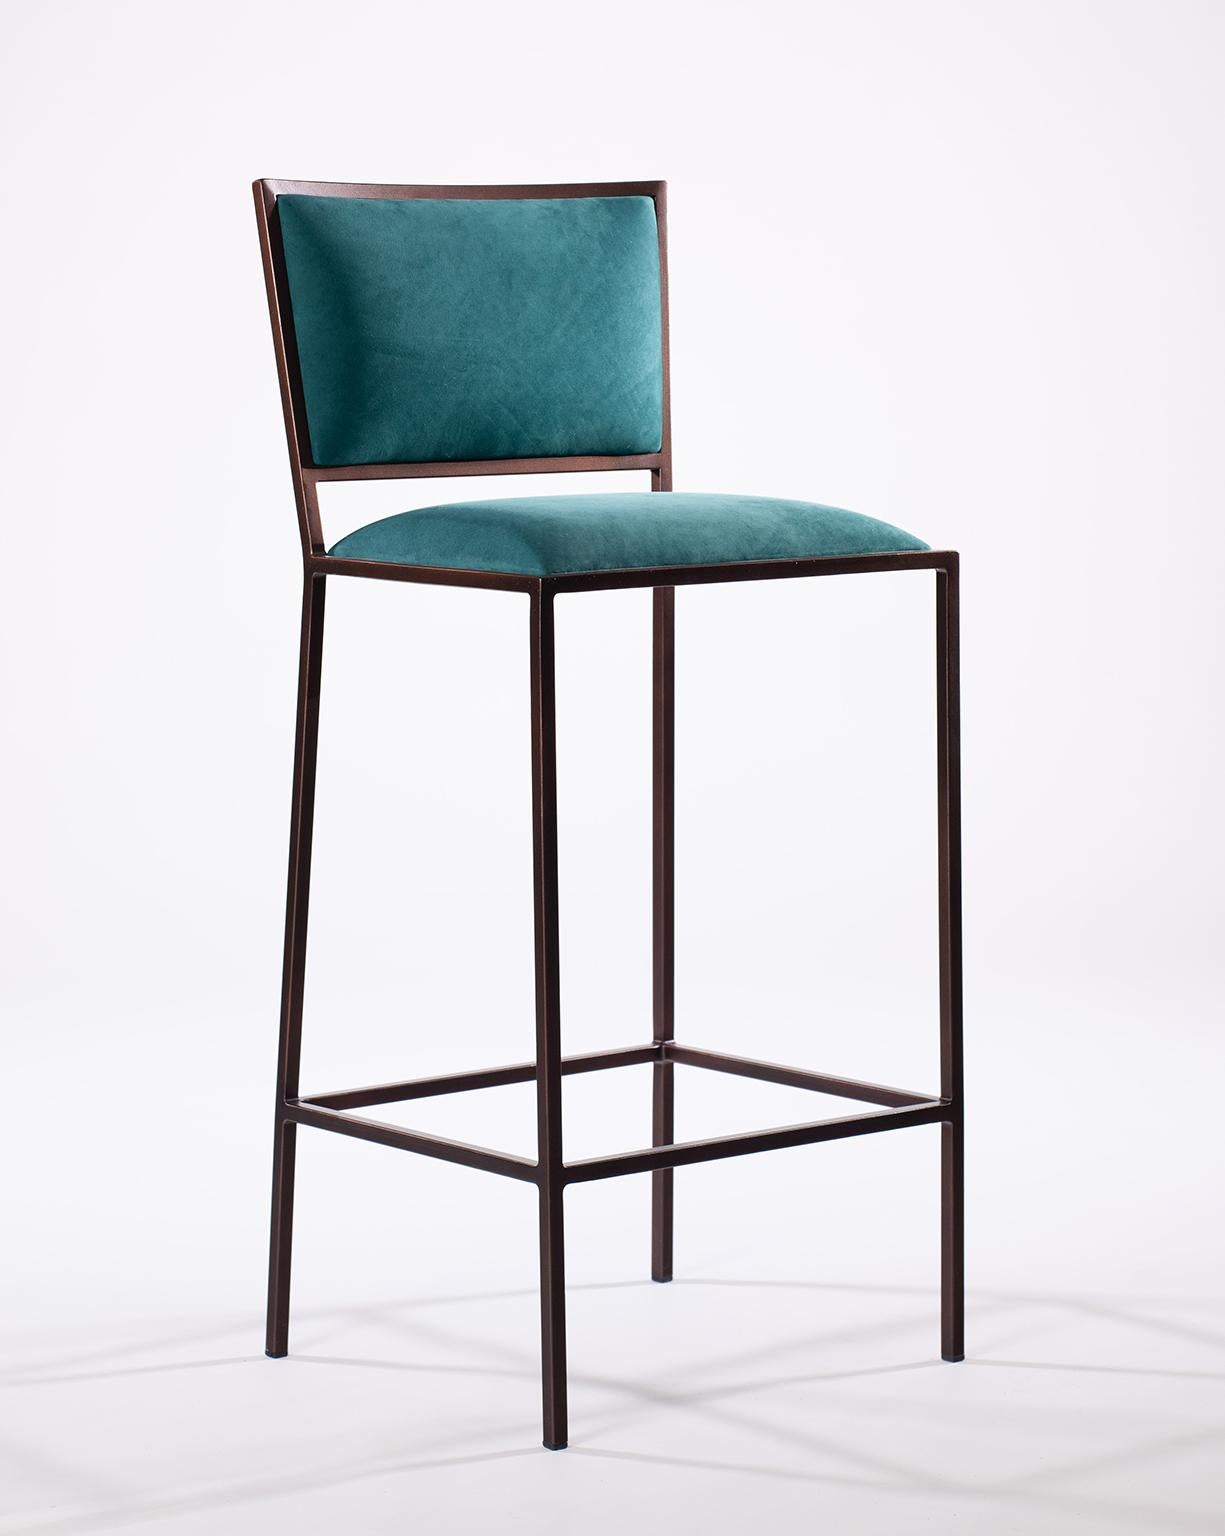 Polished 21st Century Leather Upholstered Stool in a Linear Steel Frame Simple Bar Chair For Sale